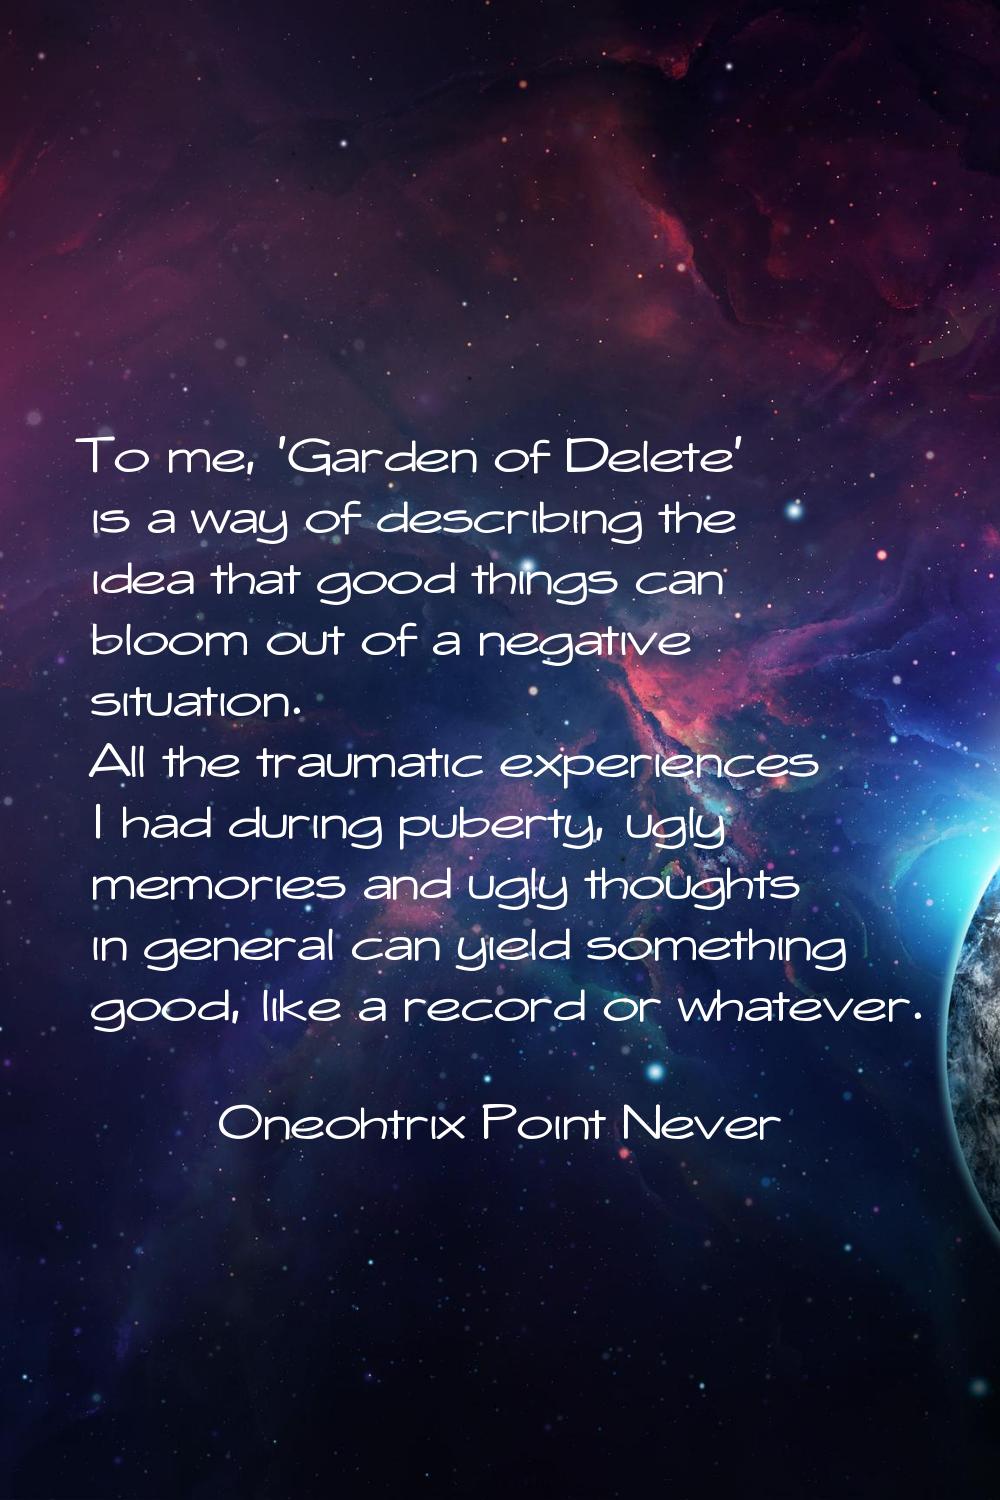 To me, 'Garden of Delete' is a way of describing the idea that good things can bloom out of a negat